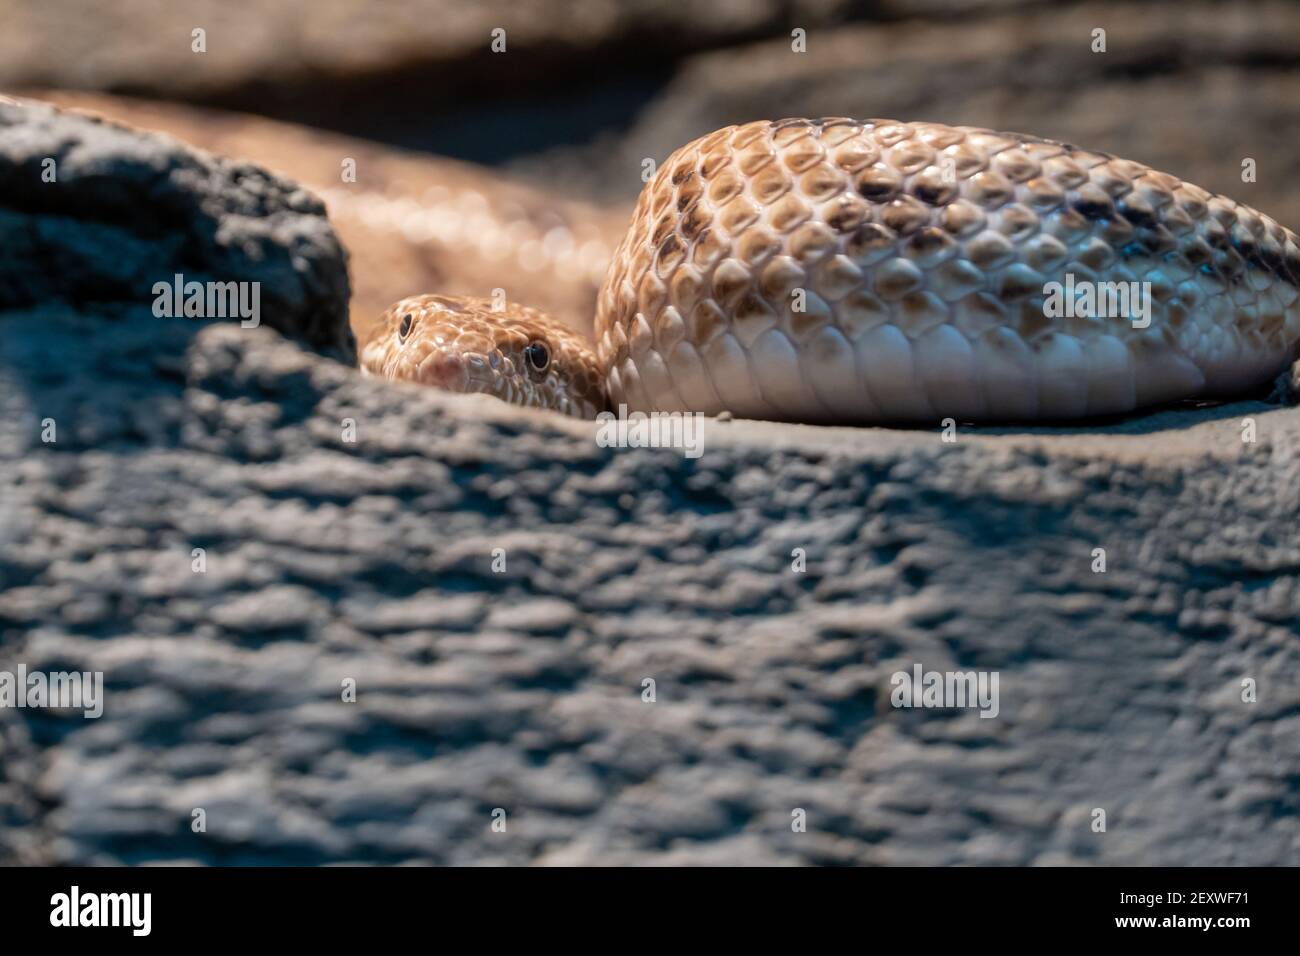 Spalerosophis diadema, known commonly as the diadem snake and the royal snake close up on the rocks at night in the middle east or north africa. Stock Photo